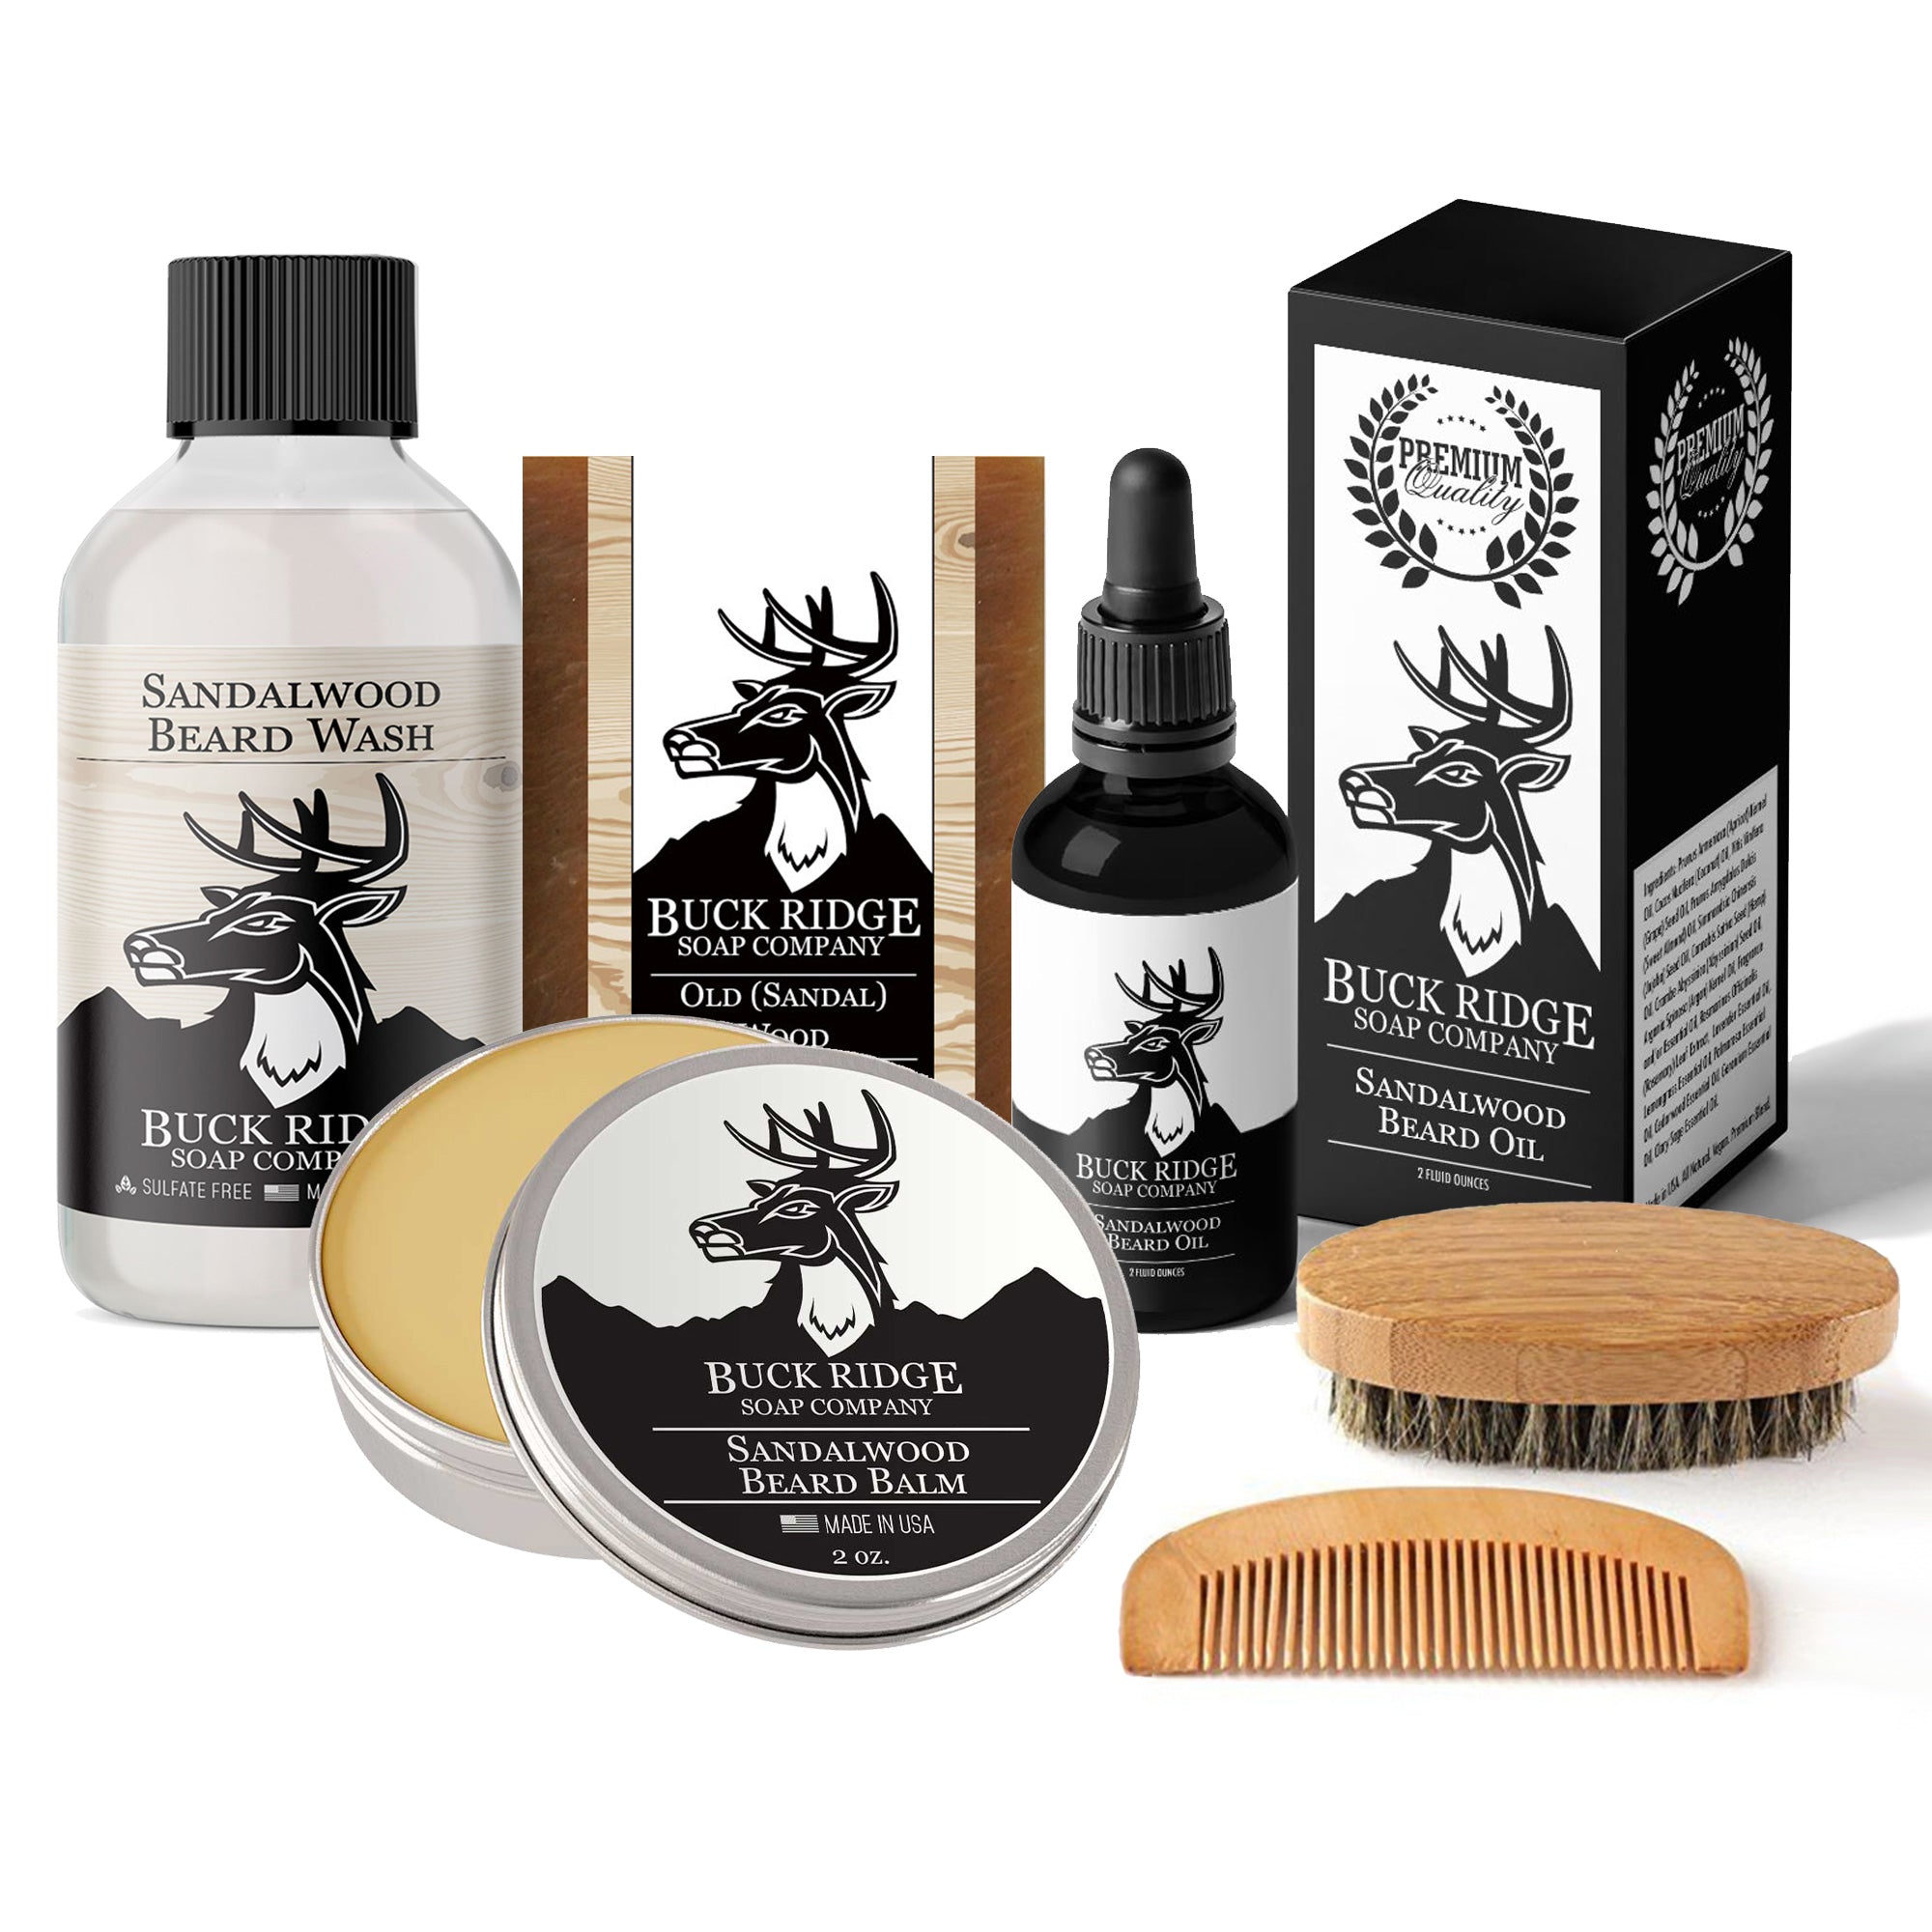 All Natural Beard and Body Care Gift Sets Black Oliver